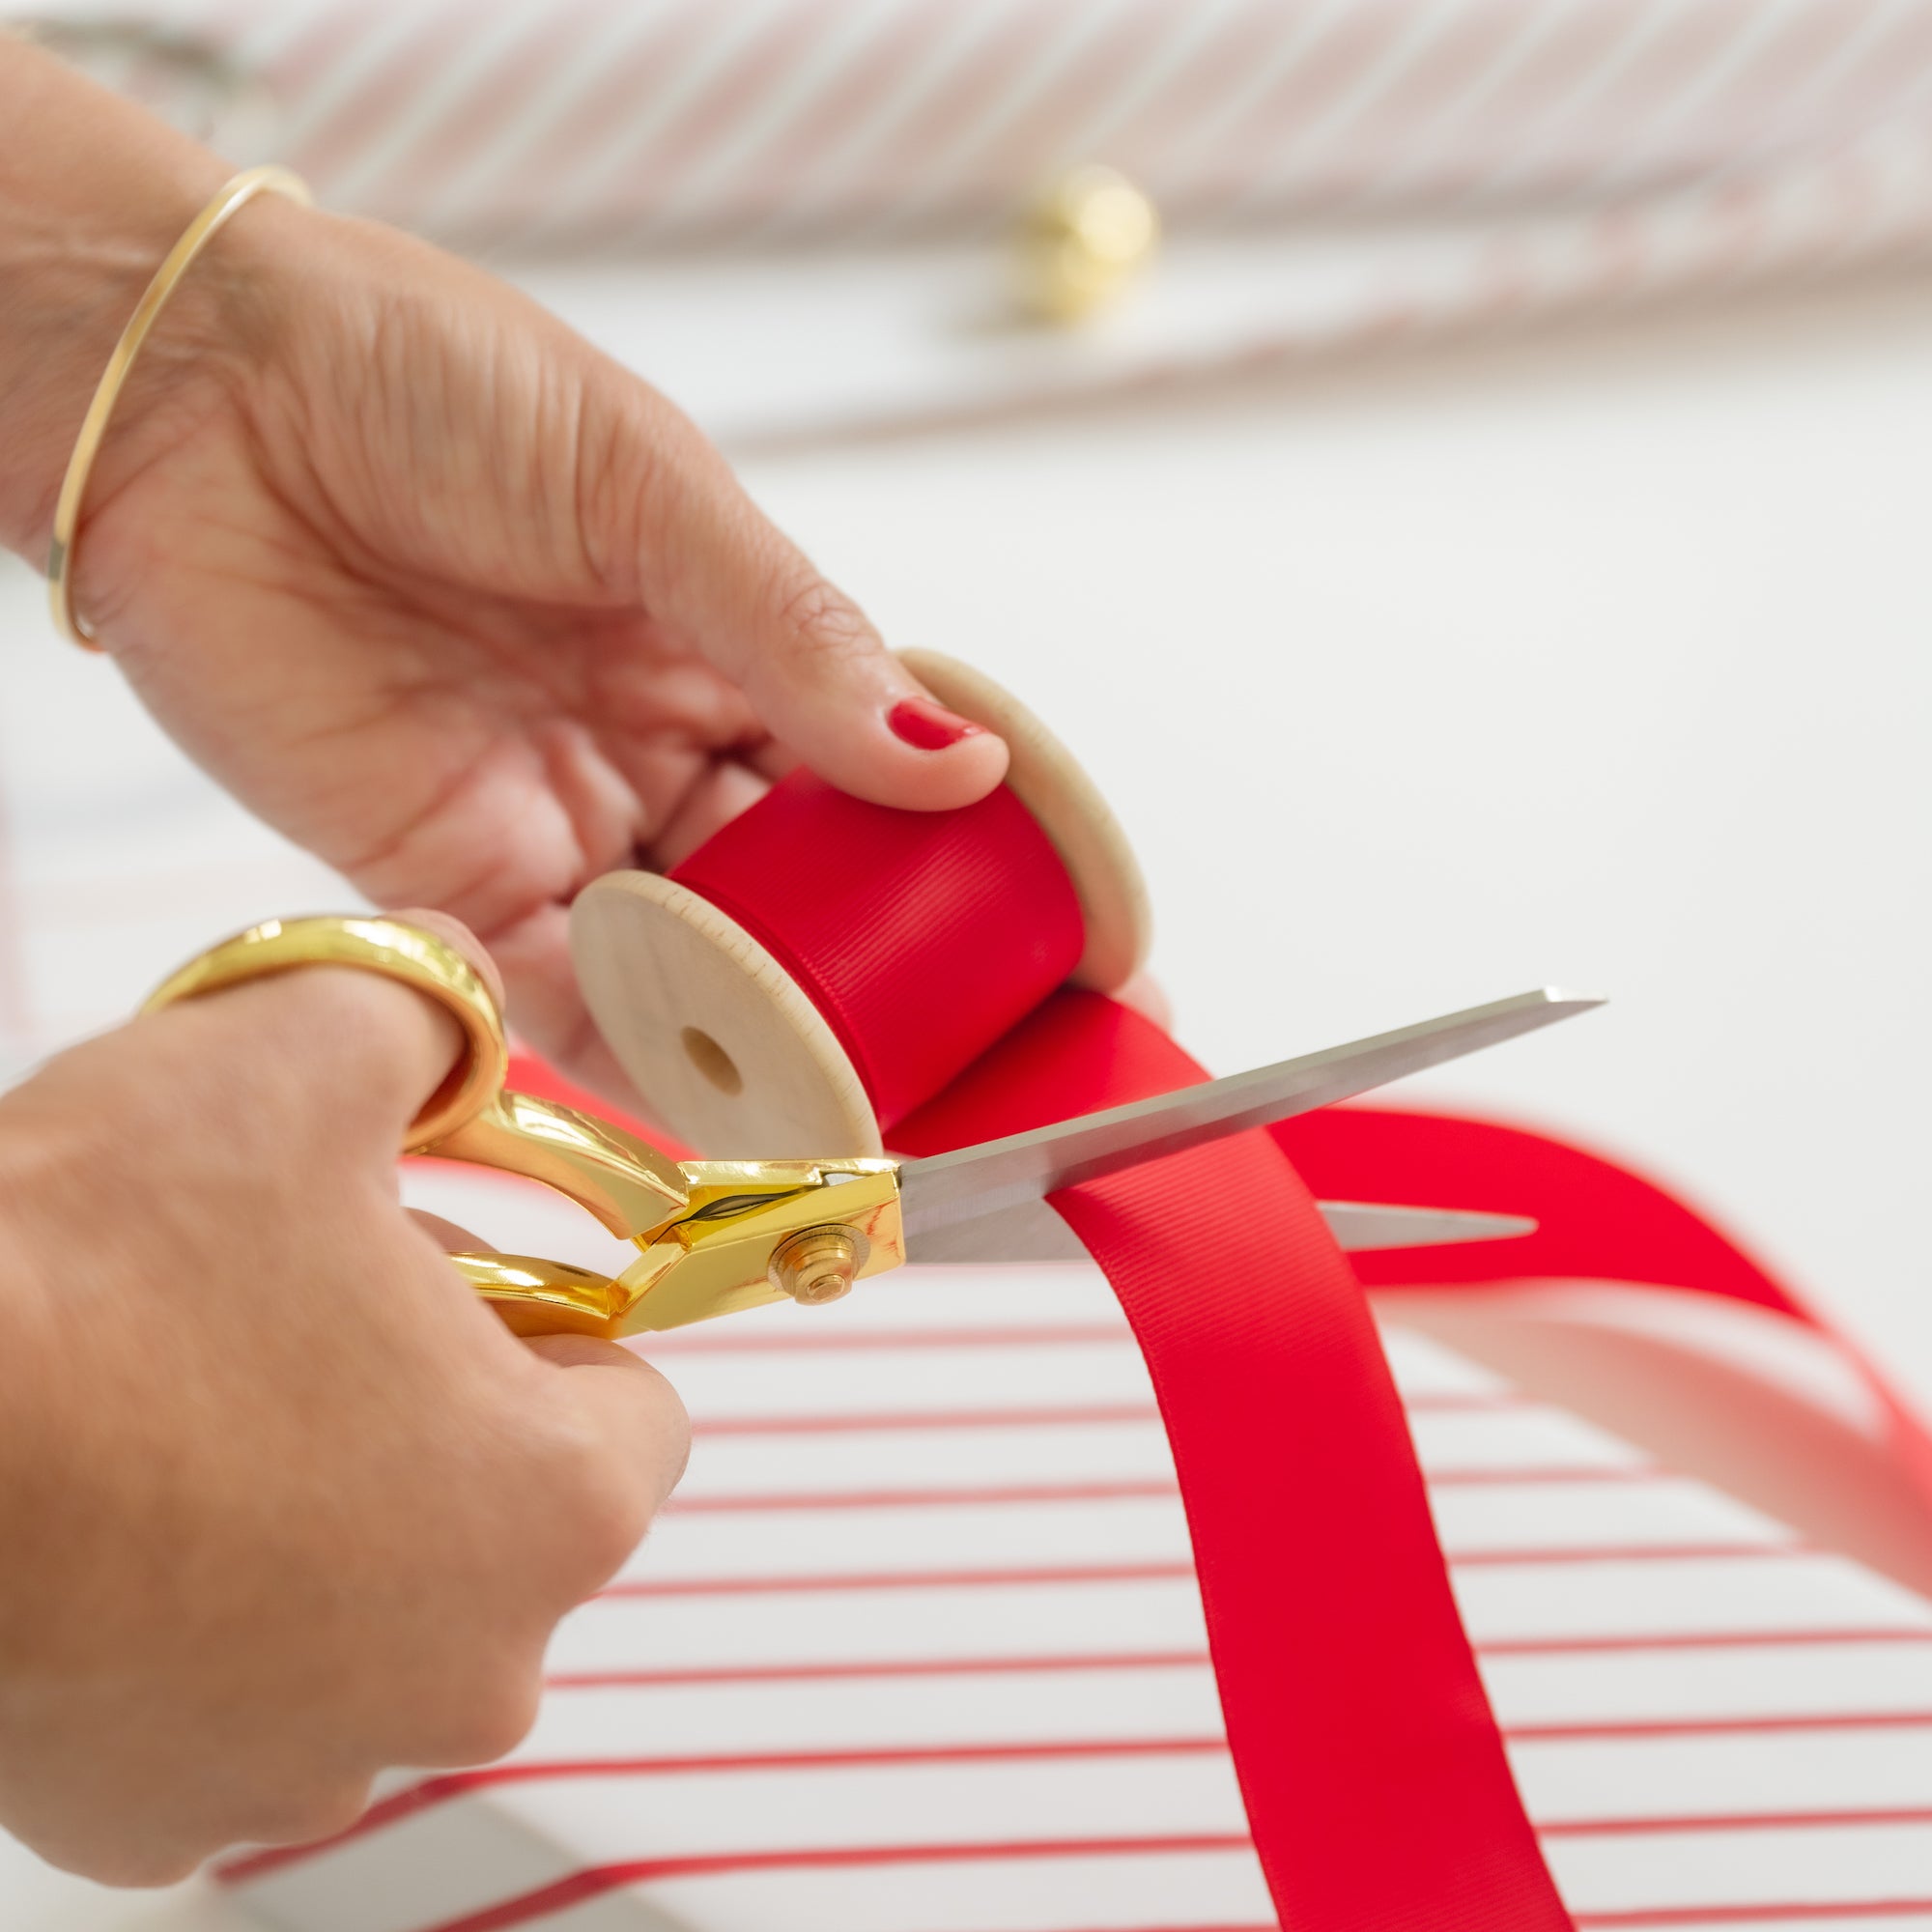 Cutting ribbon for wrapping gift